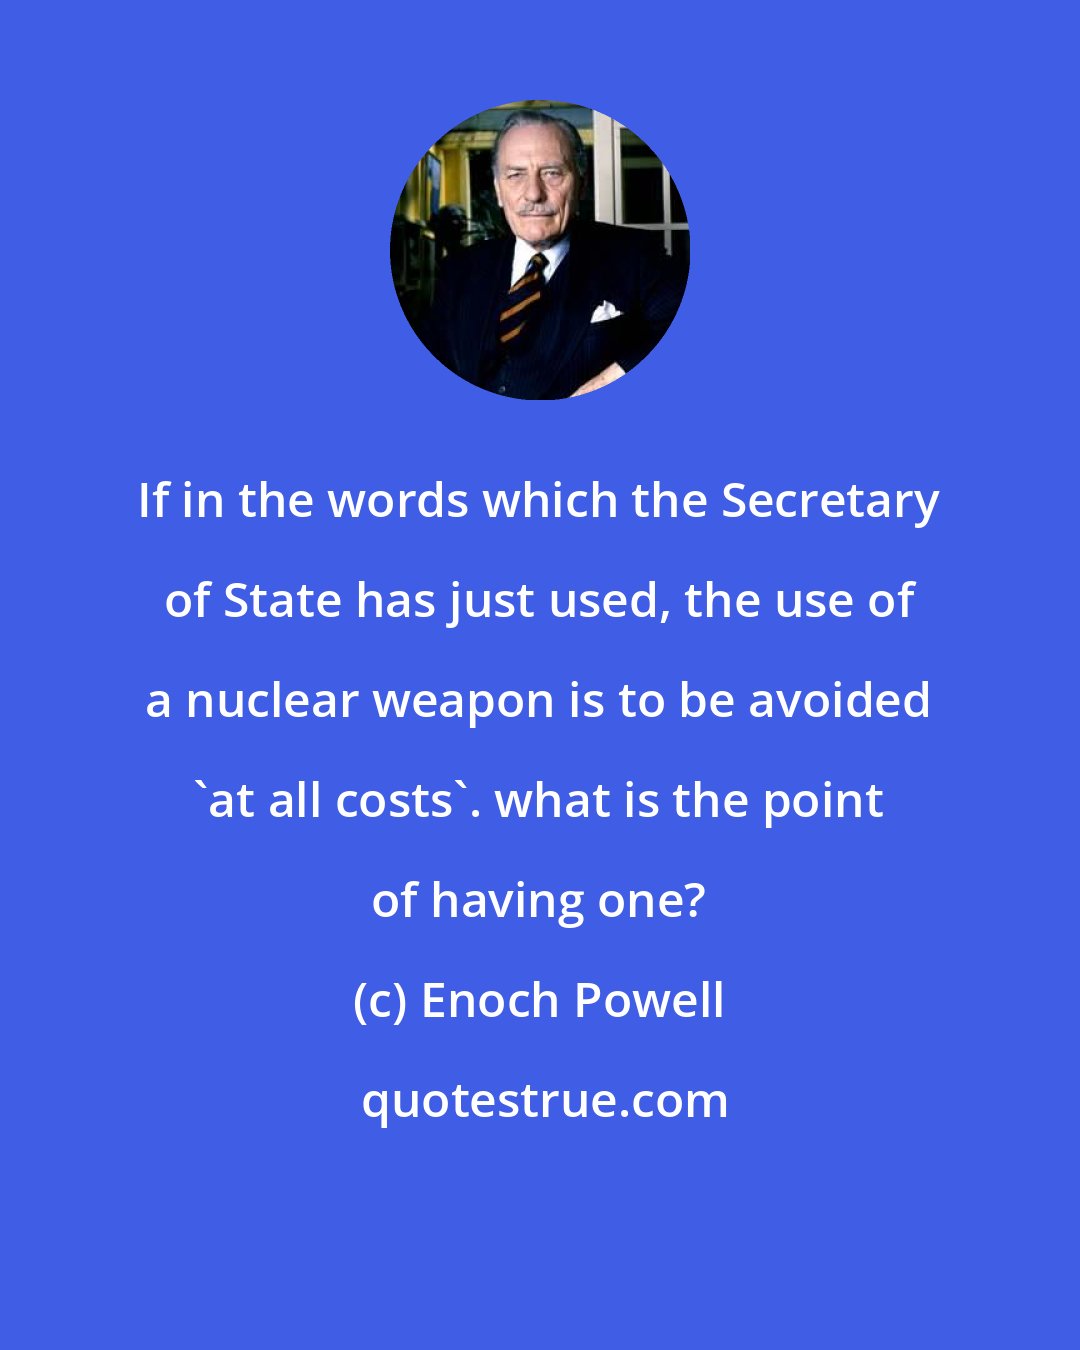 Enoch Powell: If in the words which the Secretary of State has just used, the use of a nuclear weapon is to be avoided 'at all costs'. what is the point of having one?